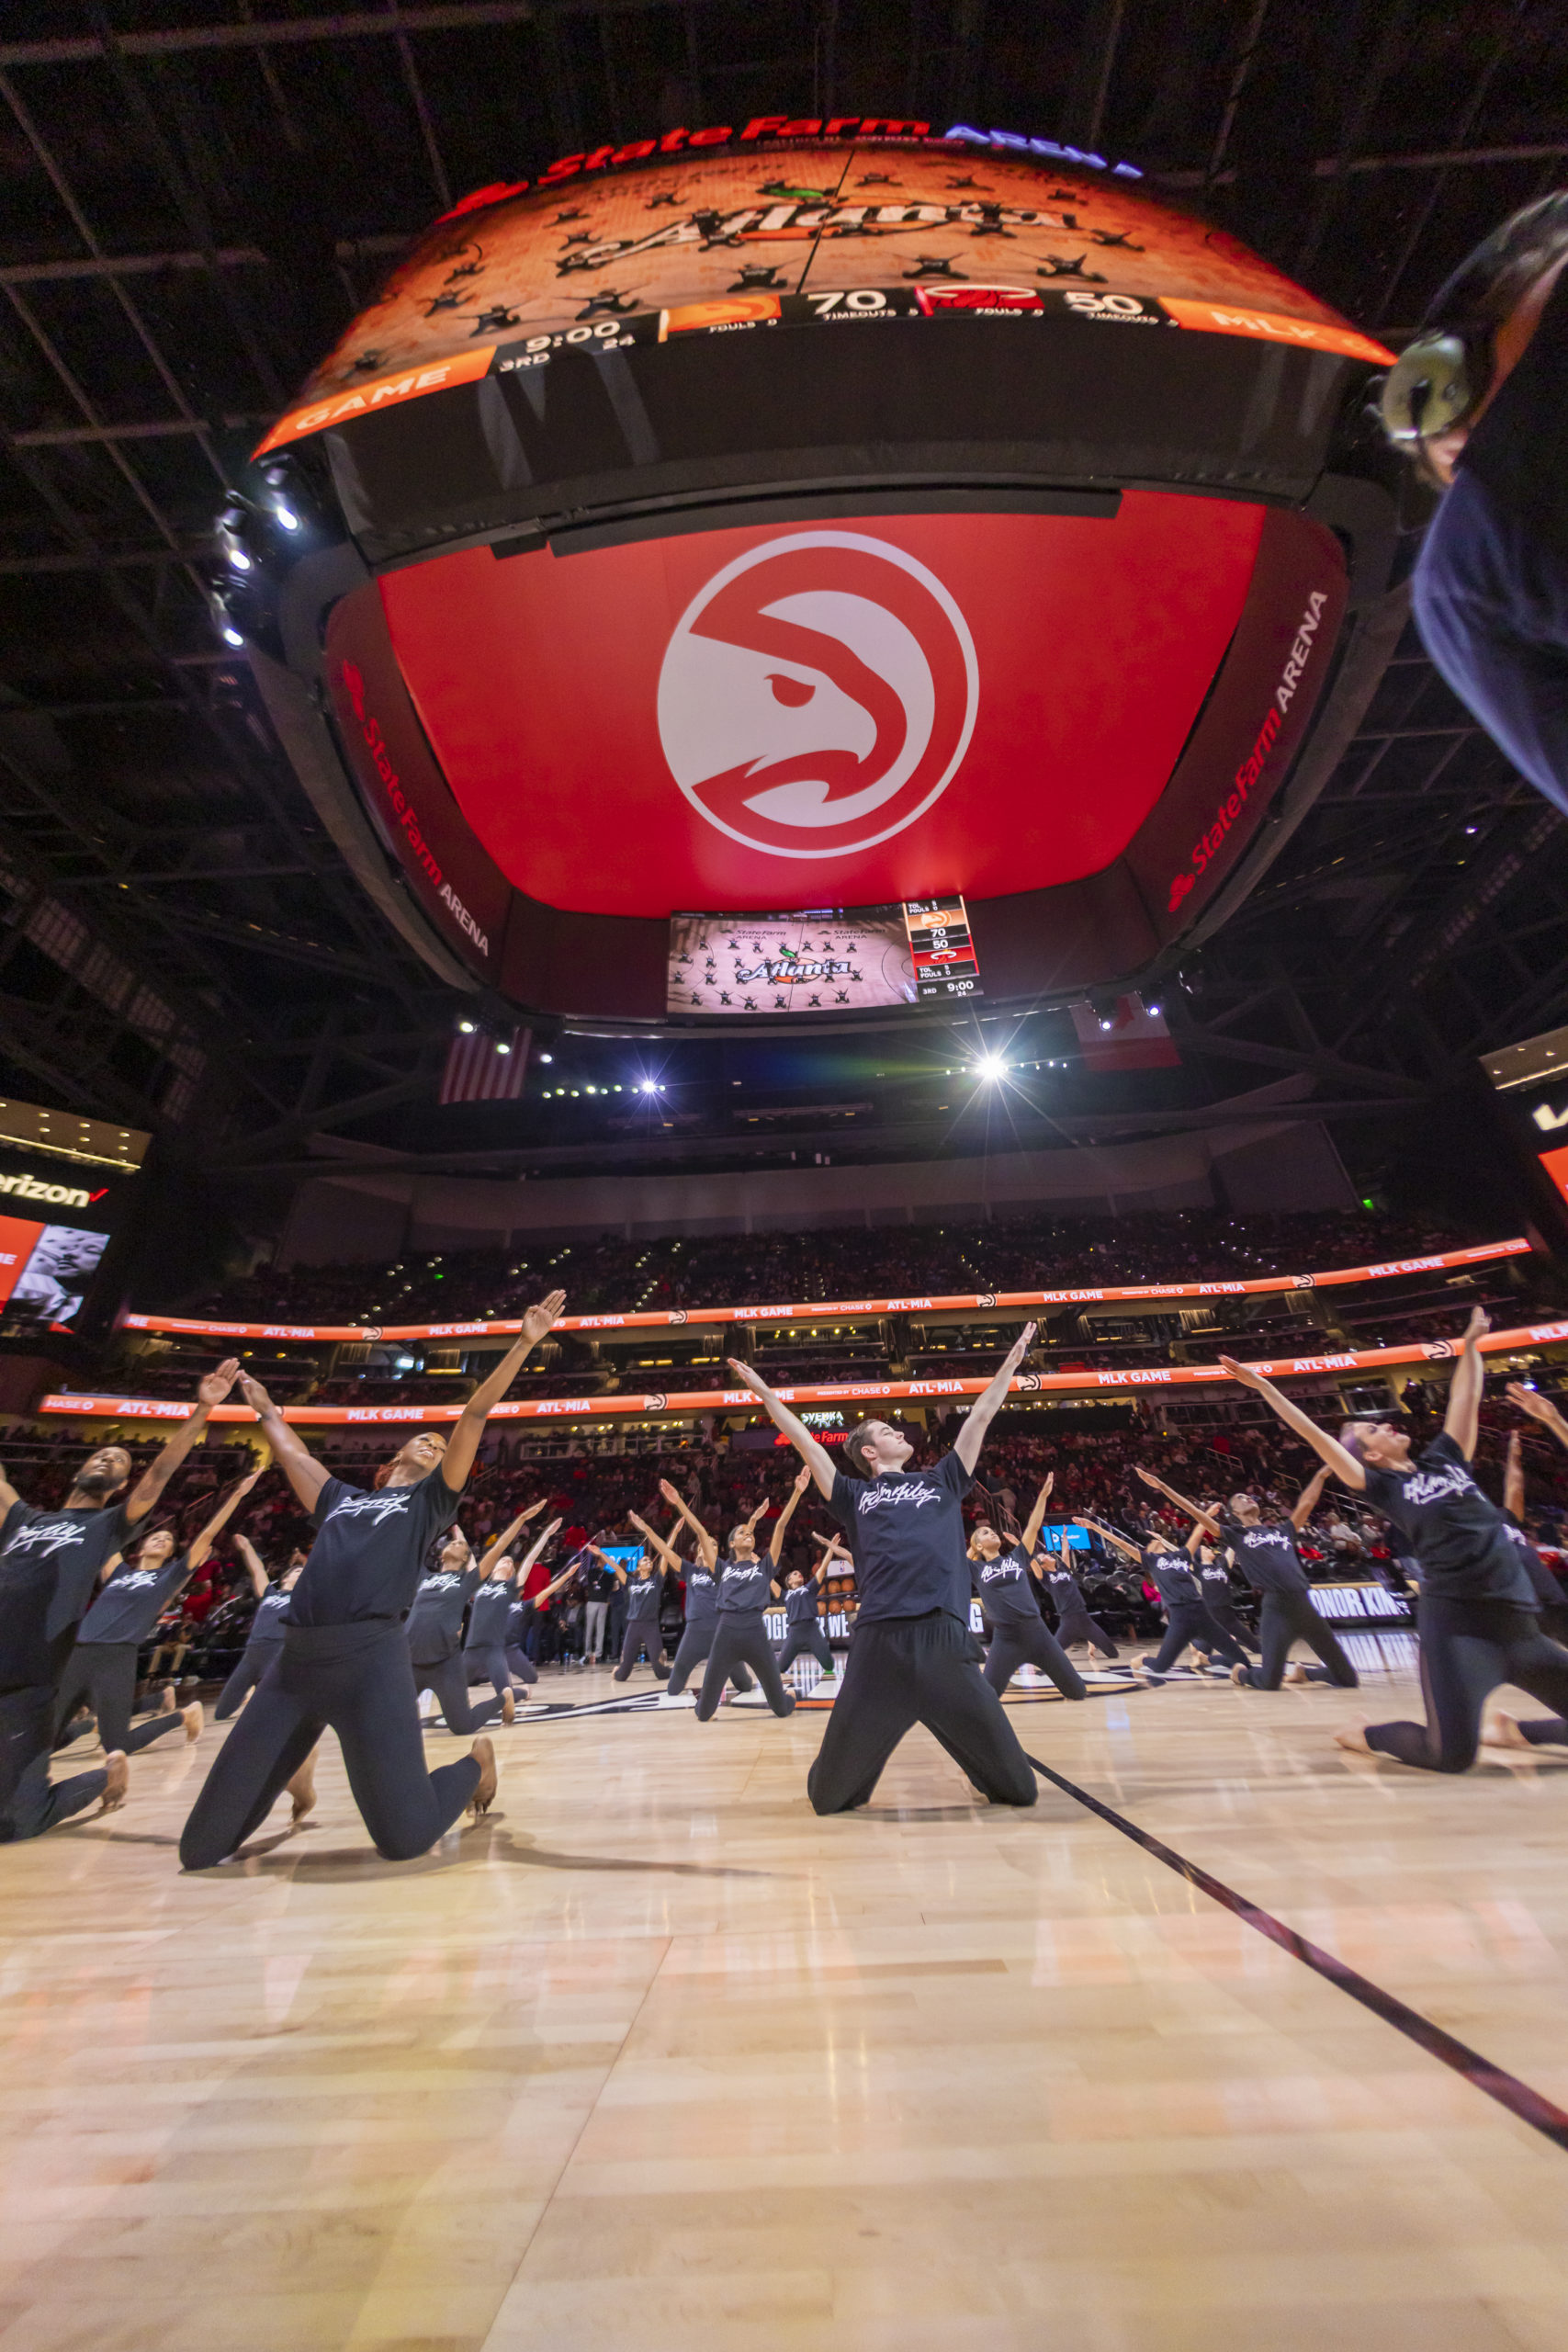 Atlanta Hawks reveal new jersey inspired by Martin Luther King Jr.